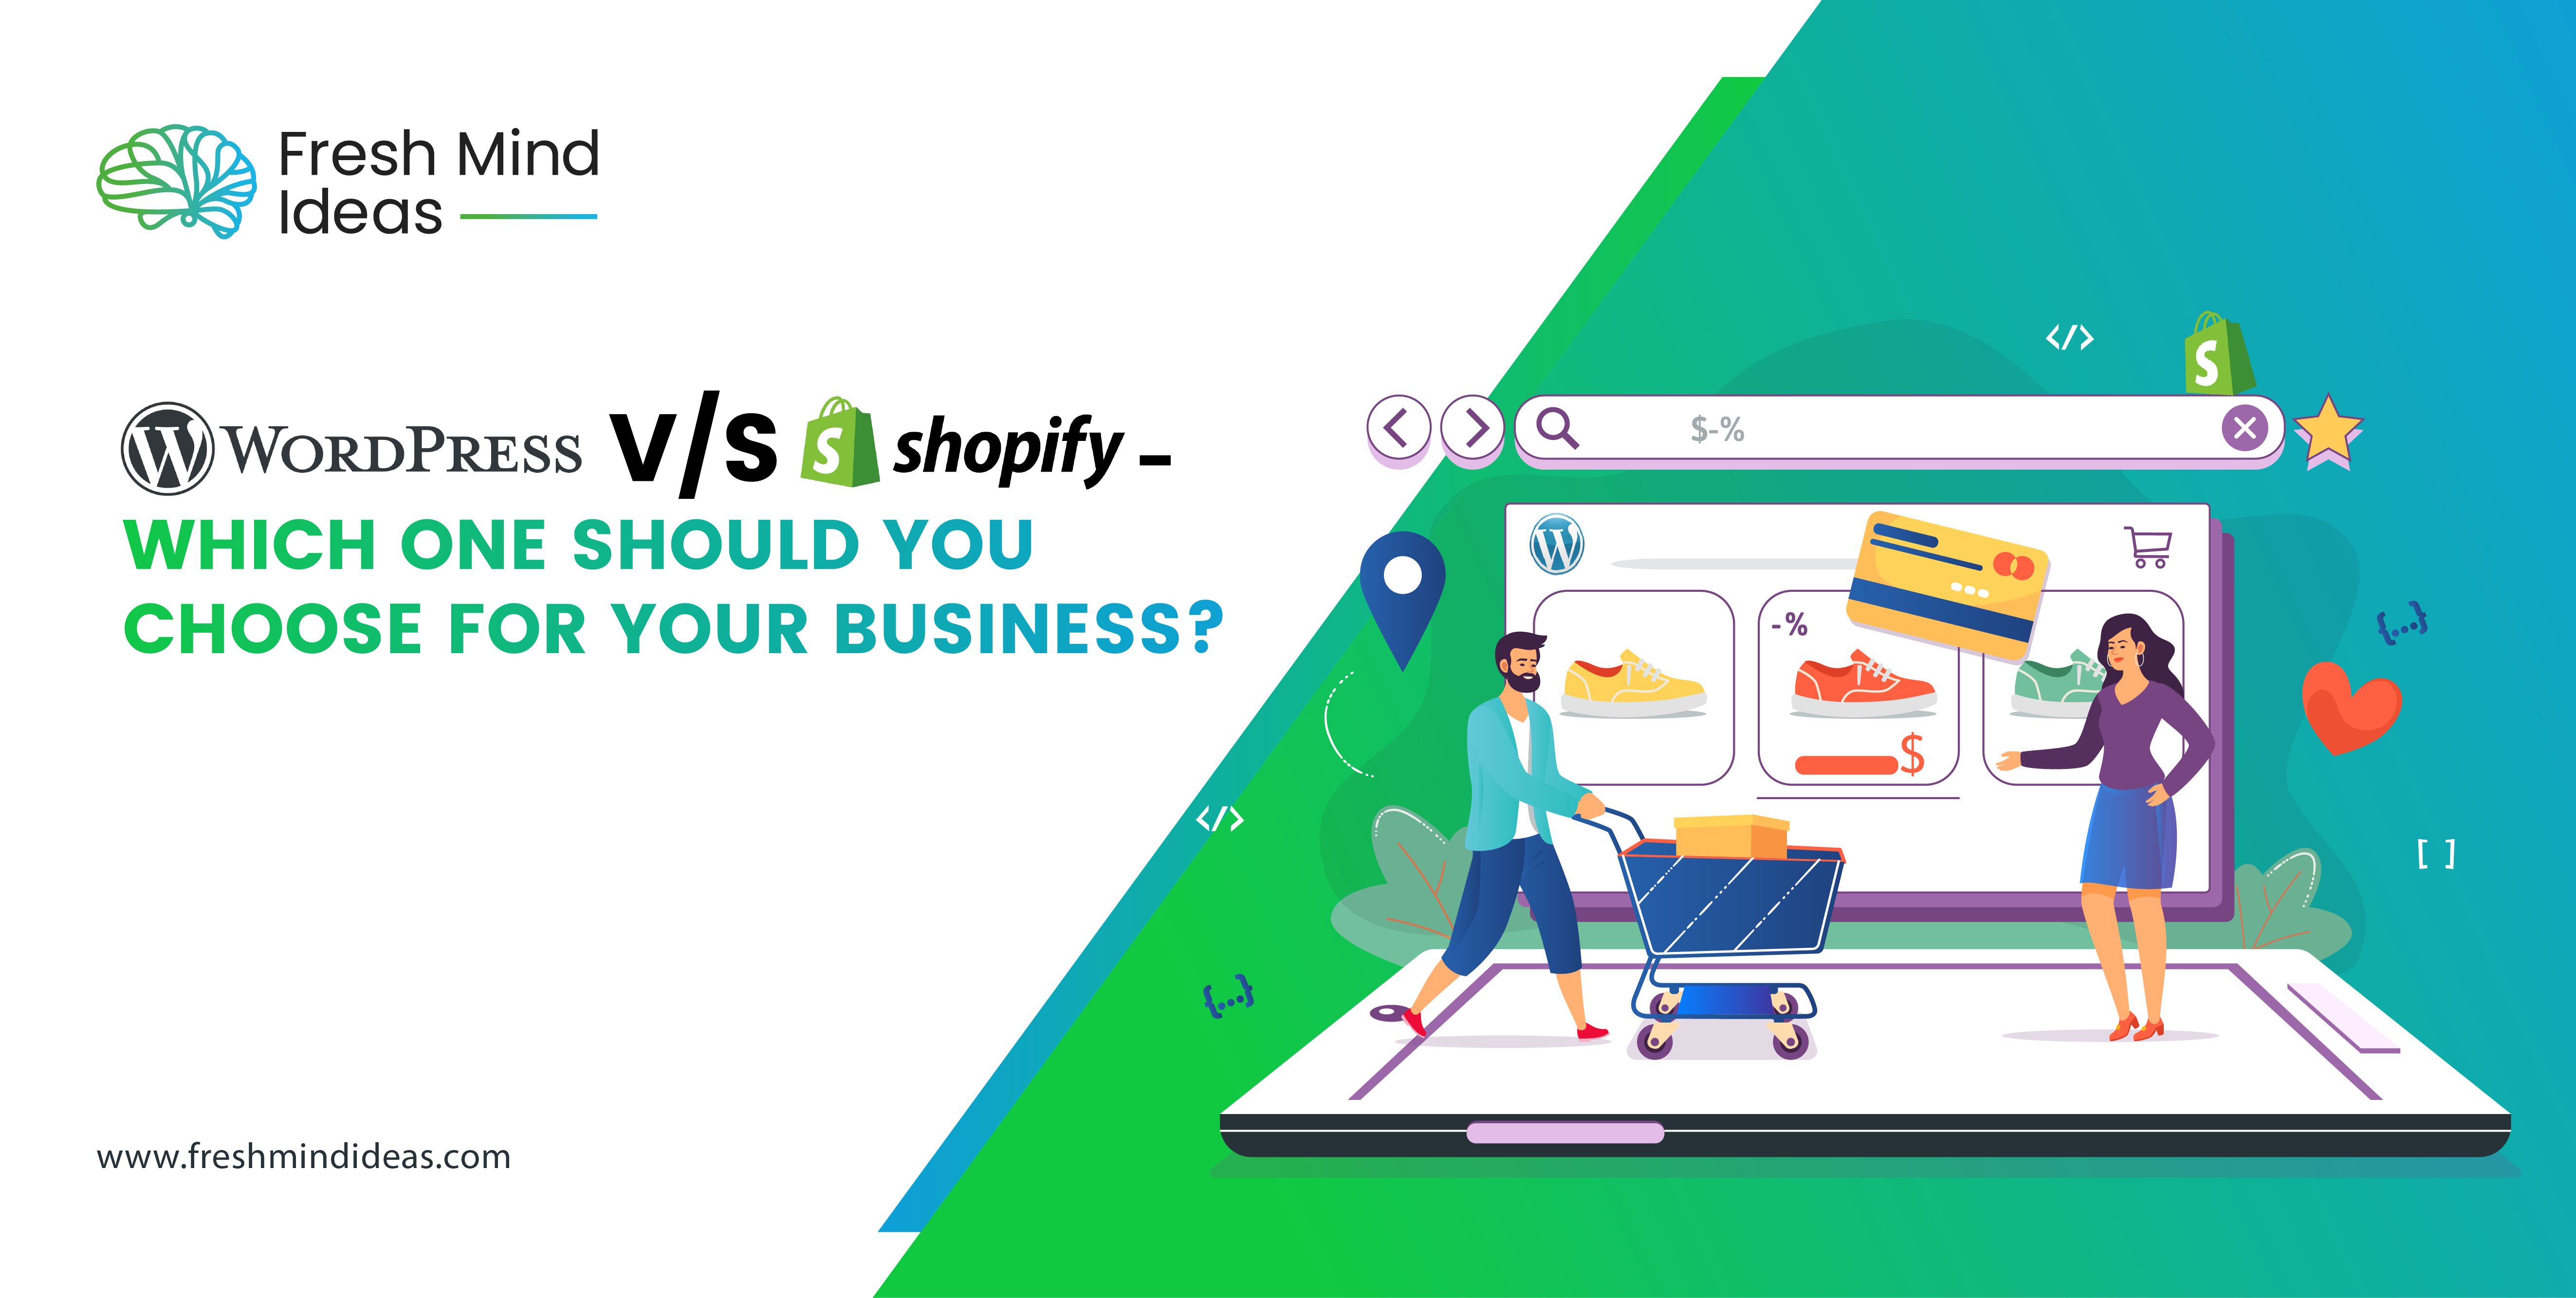 WordPress v/s Shopify - Which one should you choose for your business?